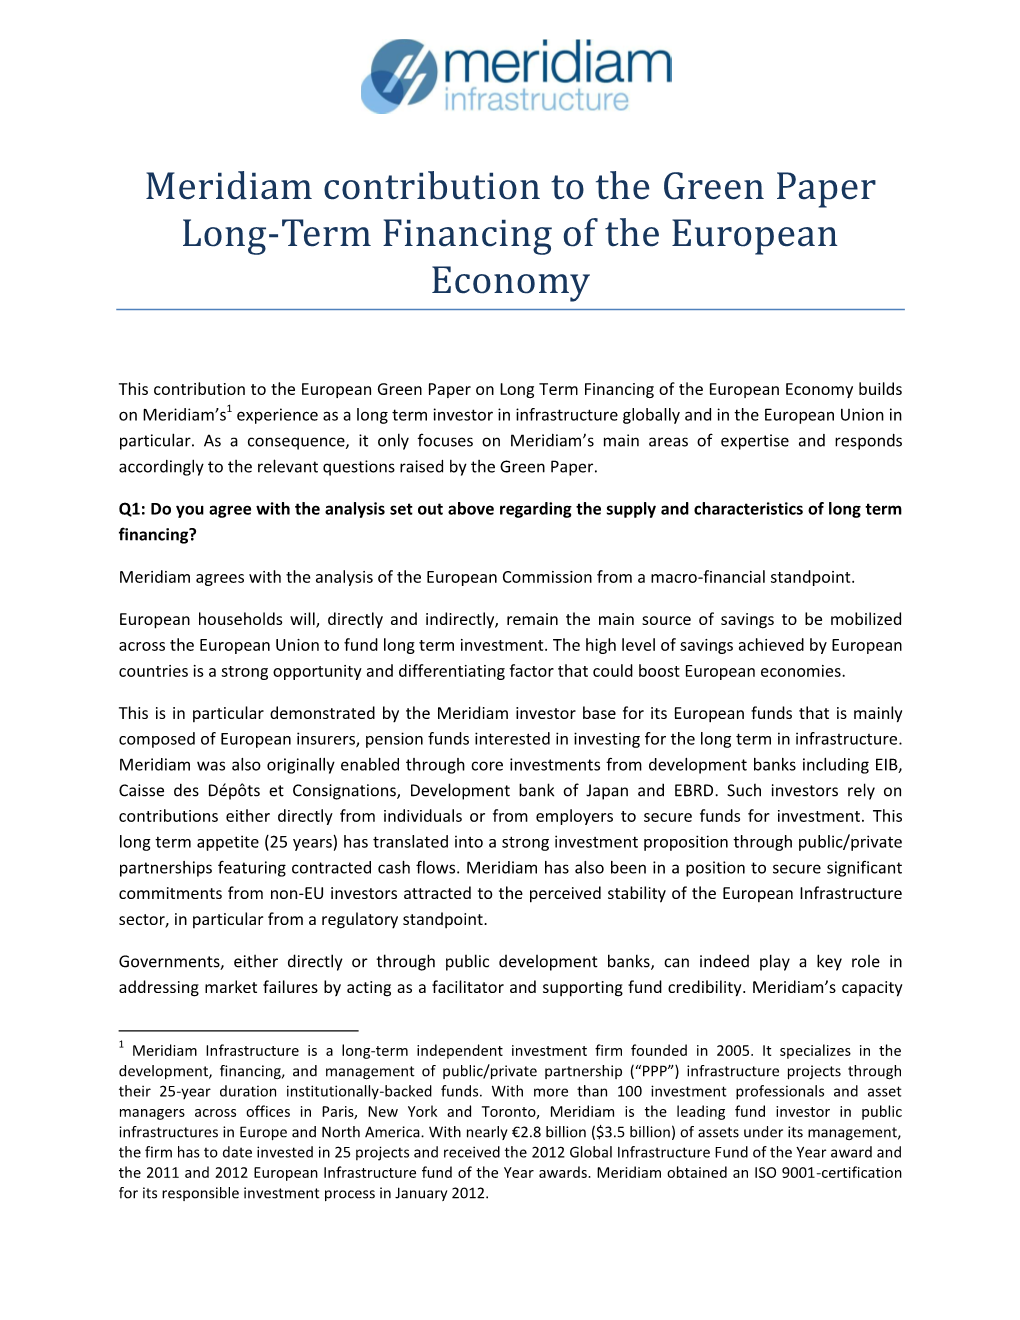 Meridiam Contribution to the Green Paper Long-Term Financing of the European Economy